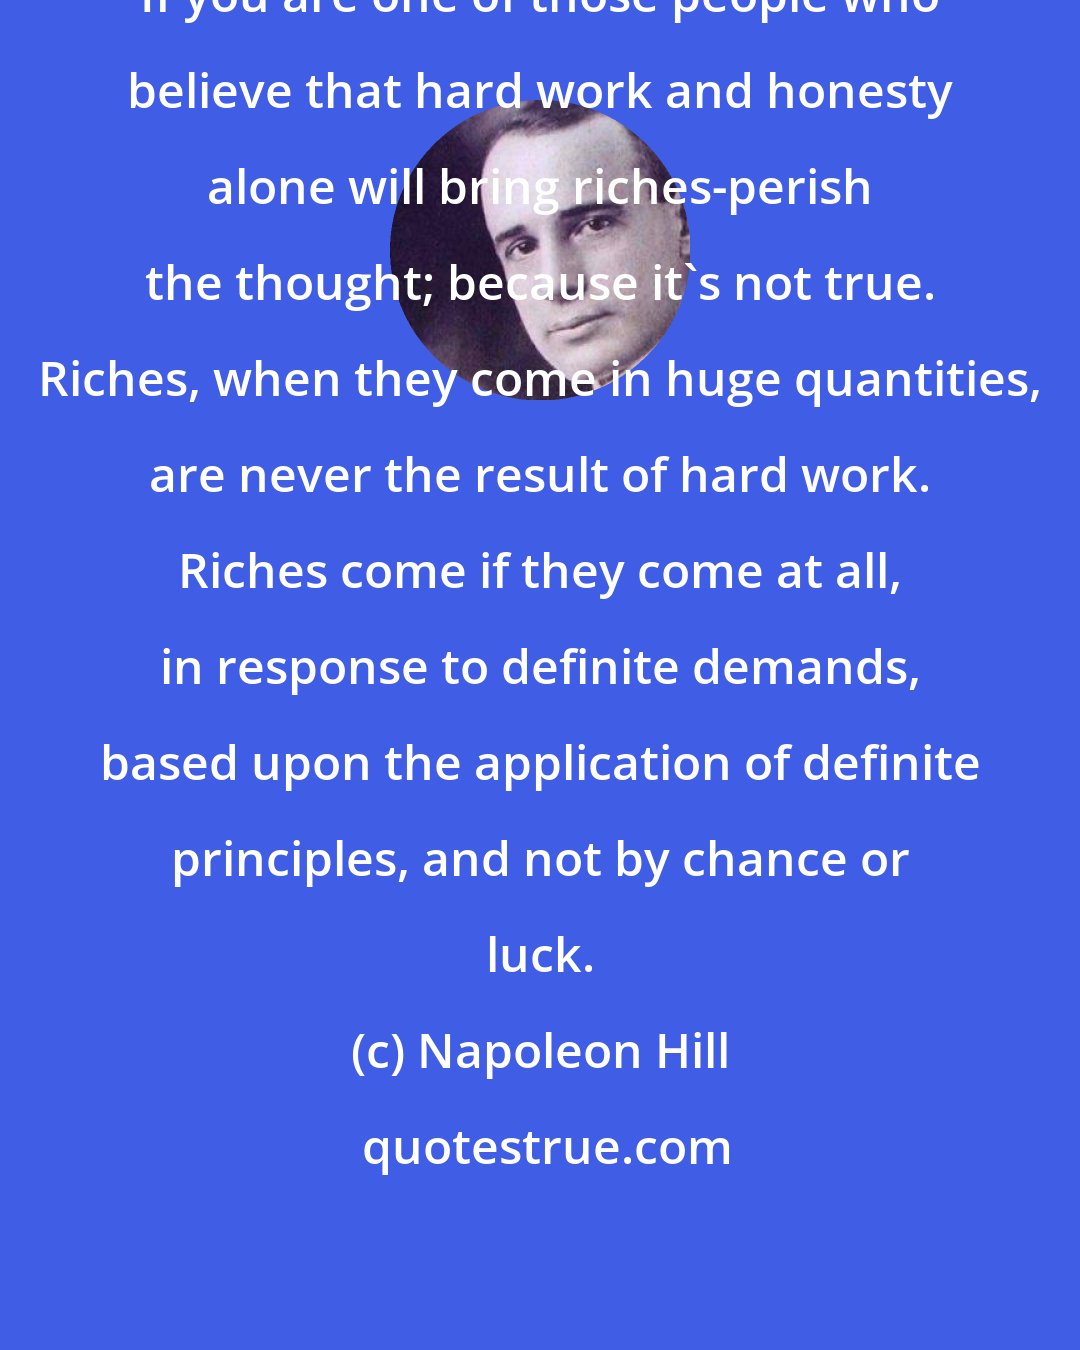 Napoleon Hill: If you are one of those people who believe that hard work and honesty alone will bring riches-perish the thought; because it's not true. Riches, when they come in huge quantities, are never the result of hard work. Riches come if they come at all, in response to definite demands, based upon the application of definite principles, and not by chance or luck.